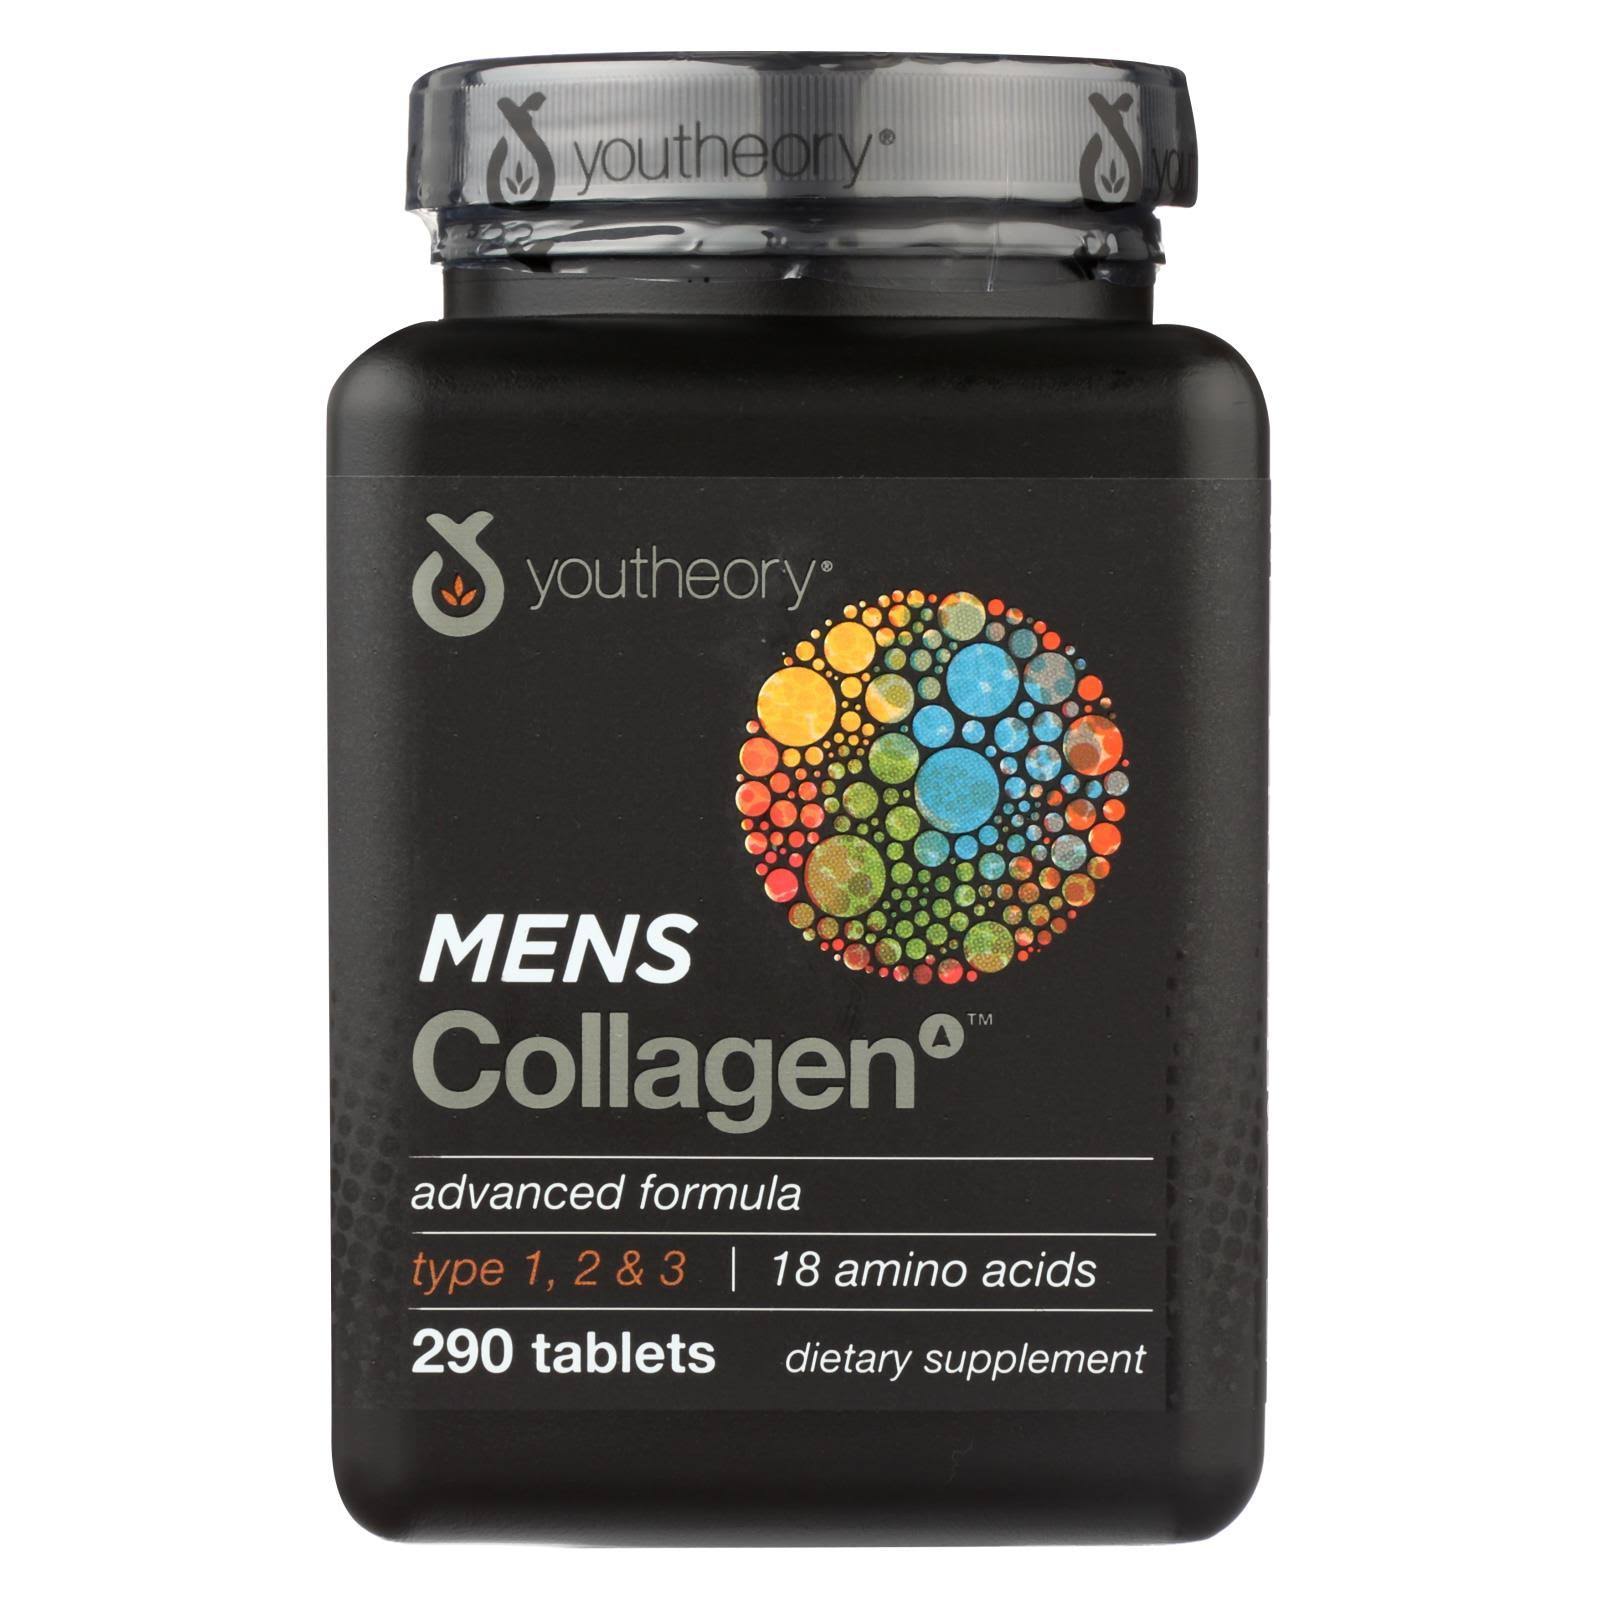 Youtheory Men's Collagen Advanced Formula Supplement - 290 Tablets